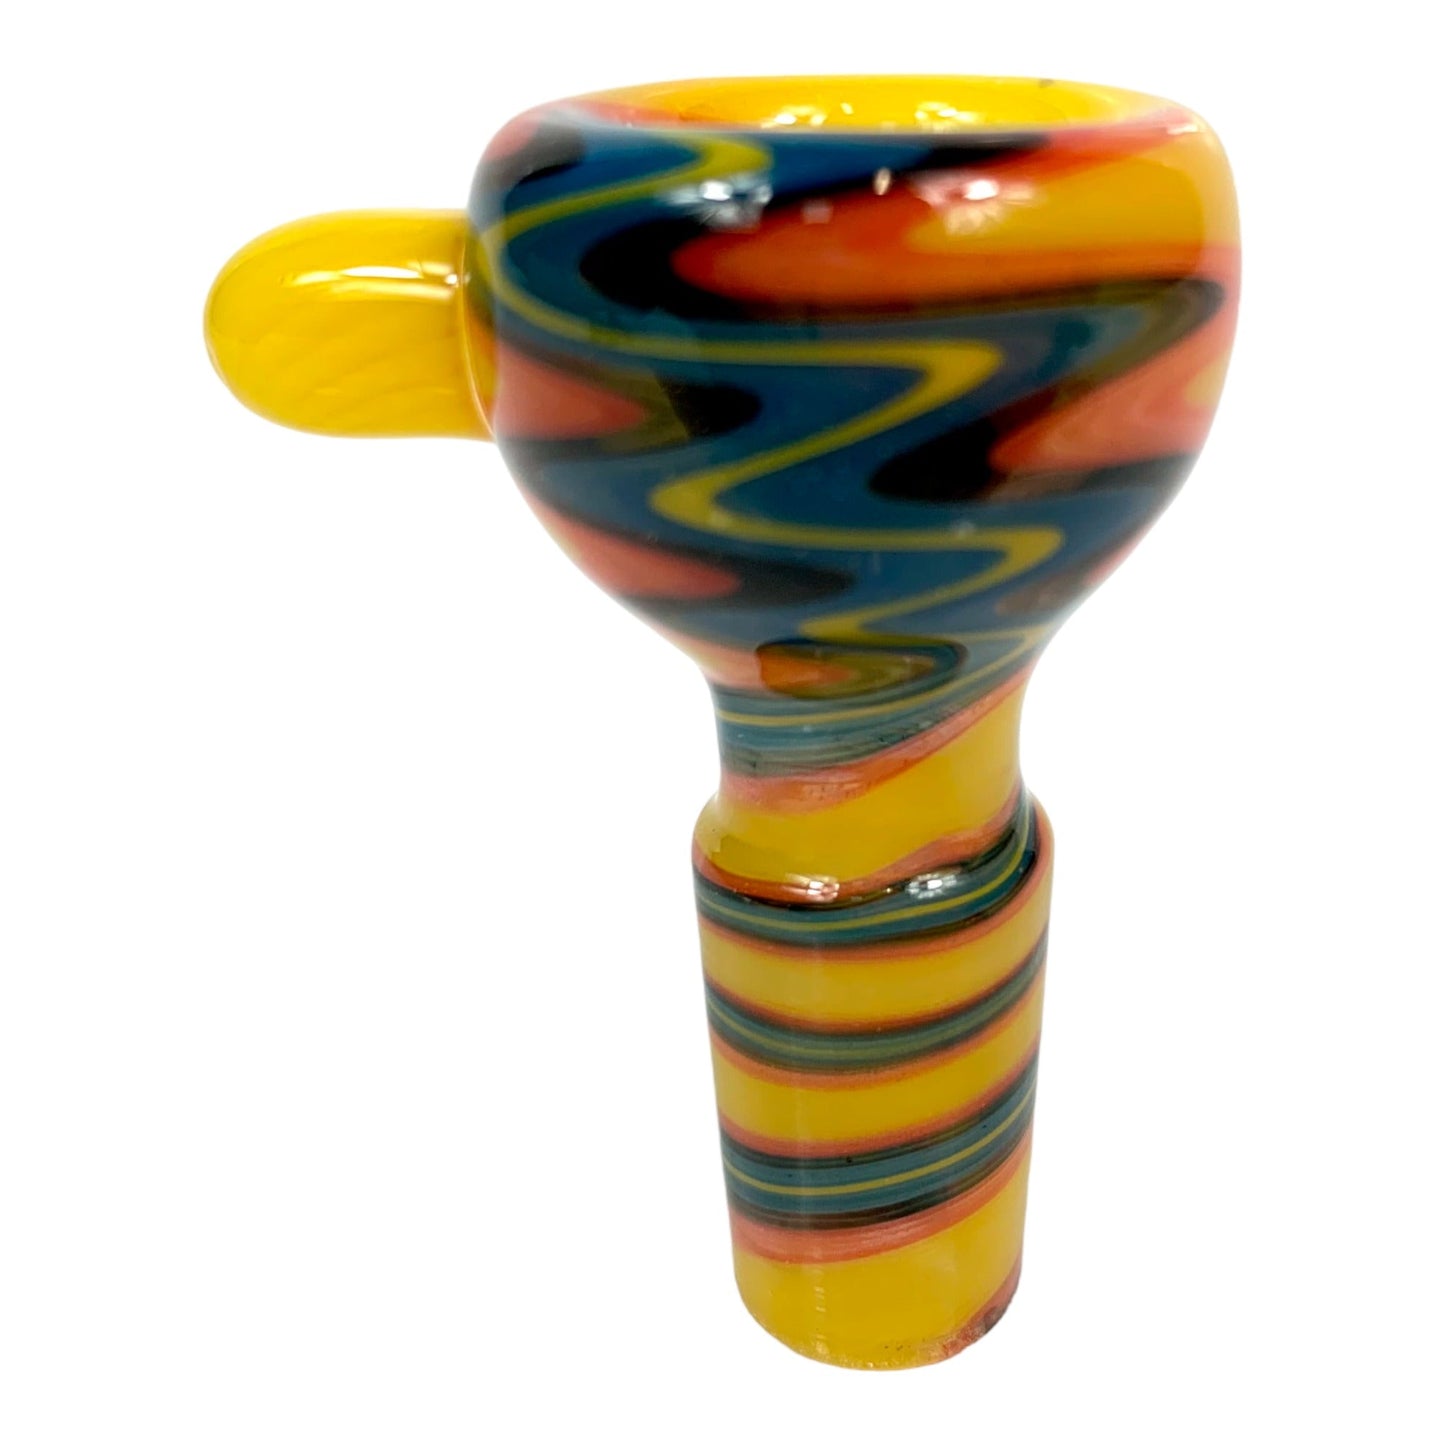 14mm Male Glass Cone Piece Coloured Swirl | Yellow and Blue Design - The Bong Baron